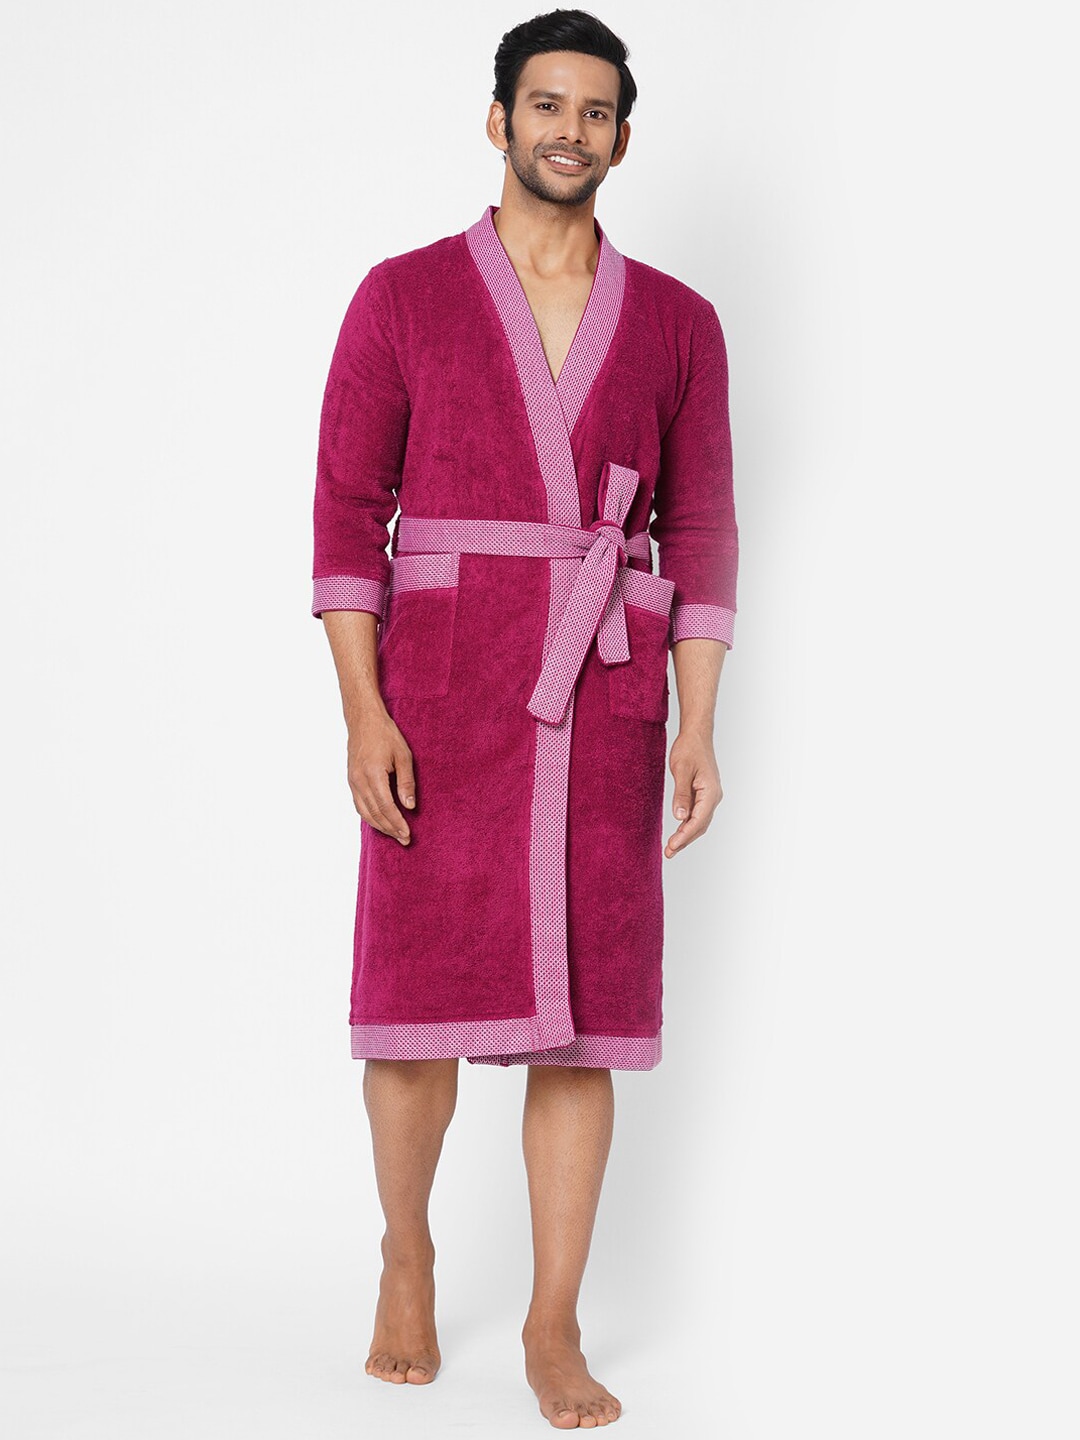 SPACES Unisex Violet Solid V-neck Cotton Bath Robe Price in India